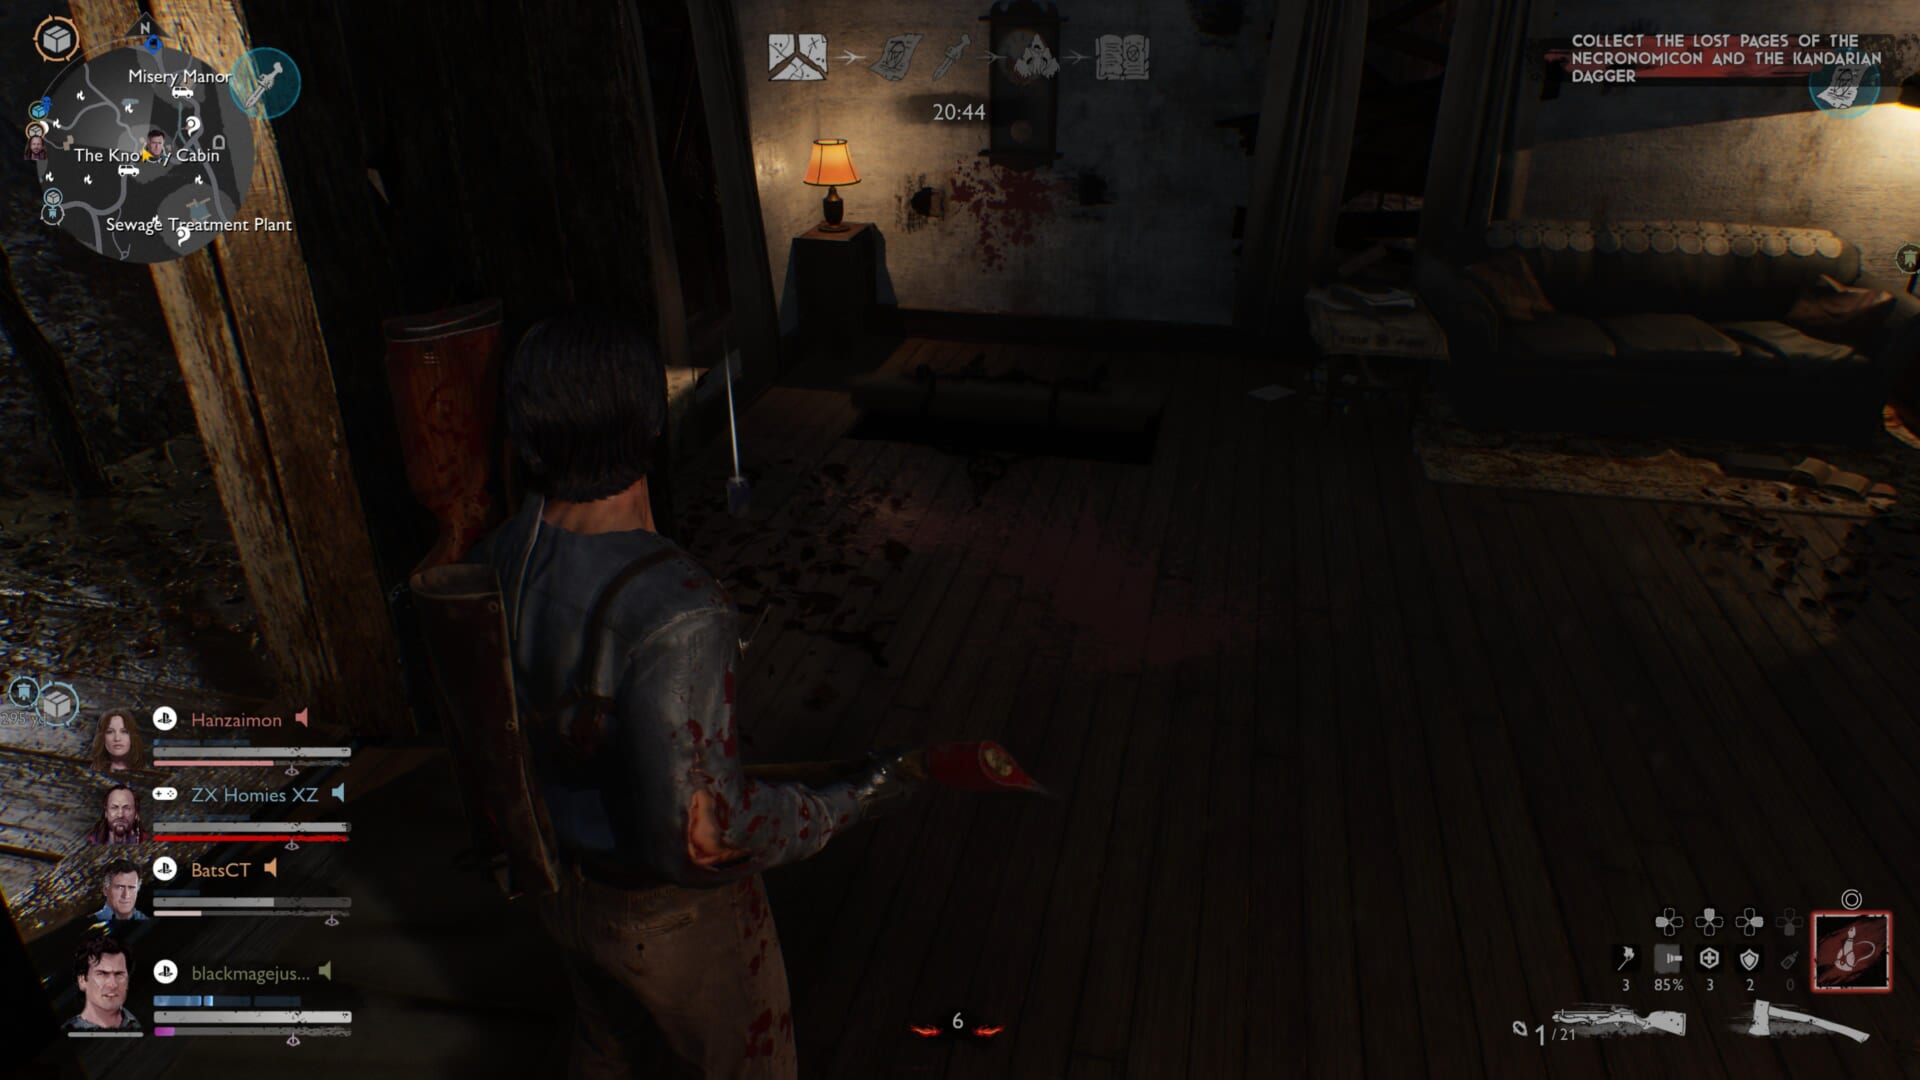 Evil Dead: The Game Review – A Little Rough Around the Edges